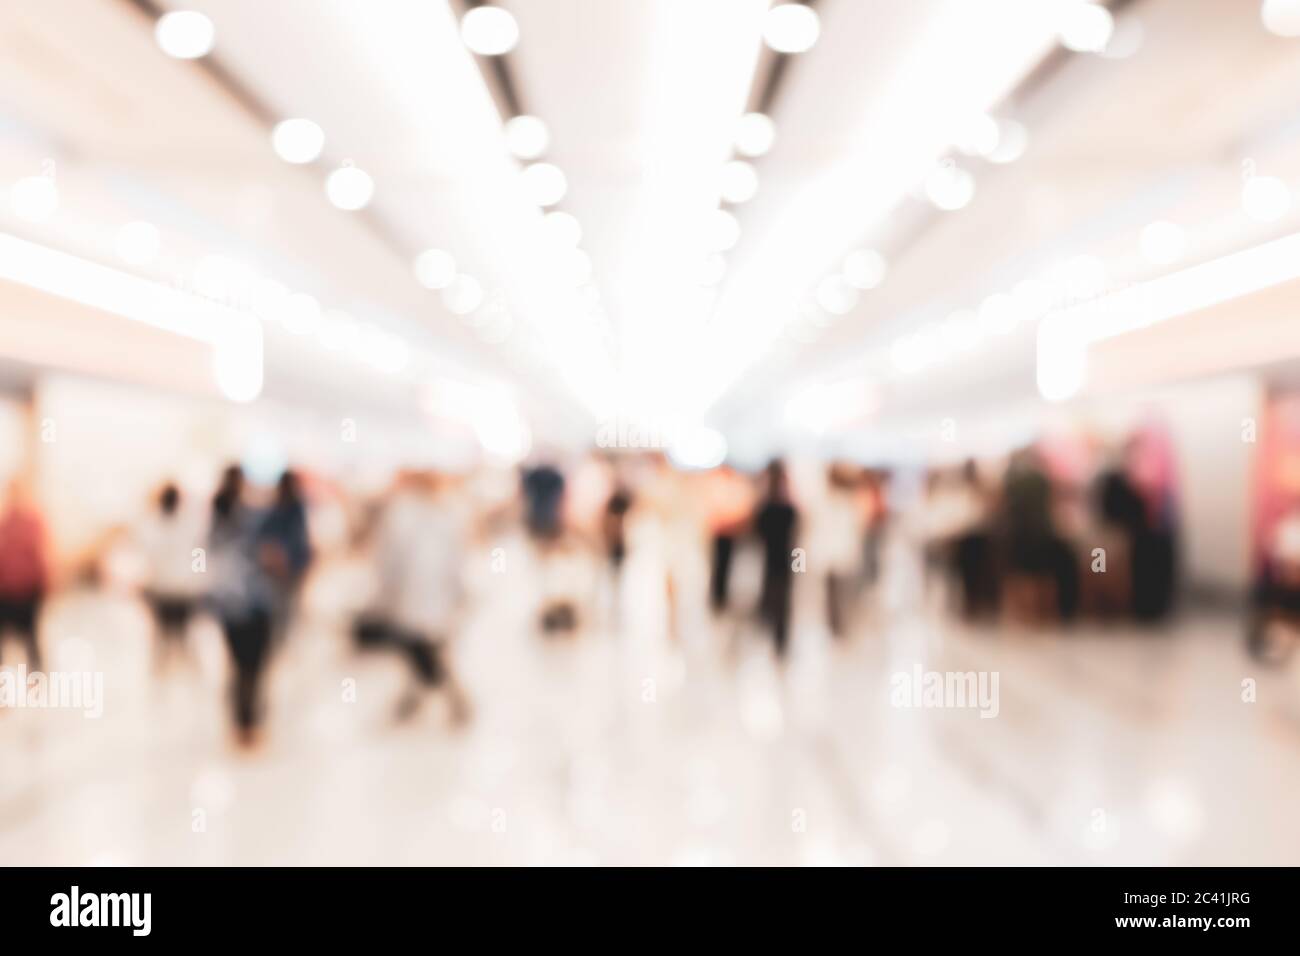 Abstract blur people in exhibition hall event background, defocused tradeshow event exhibition, business convention show, job fair, technology expo. O Stock Photo